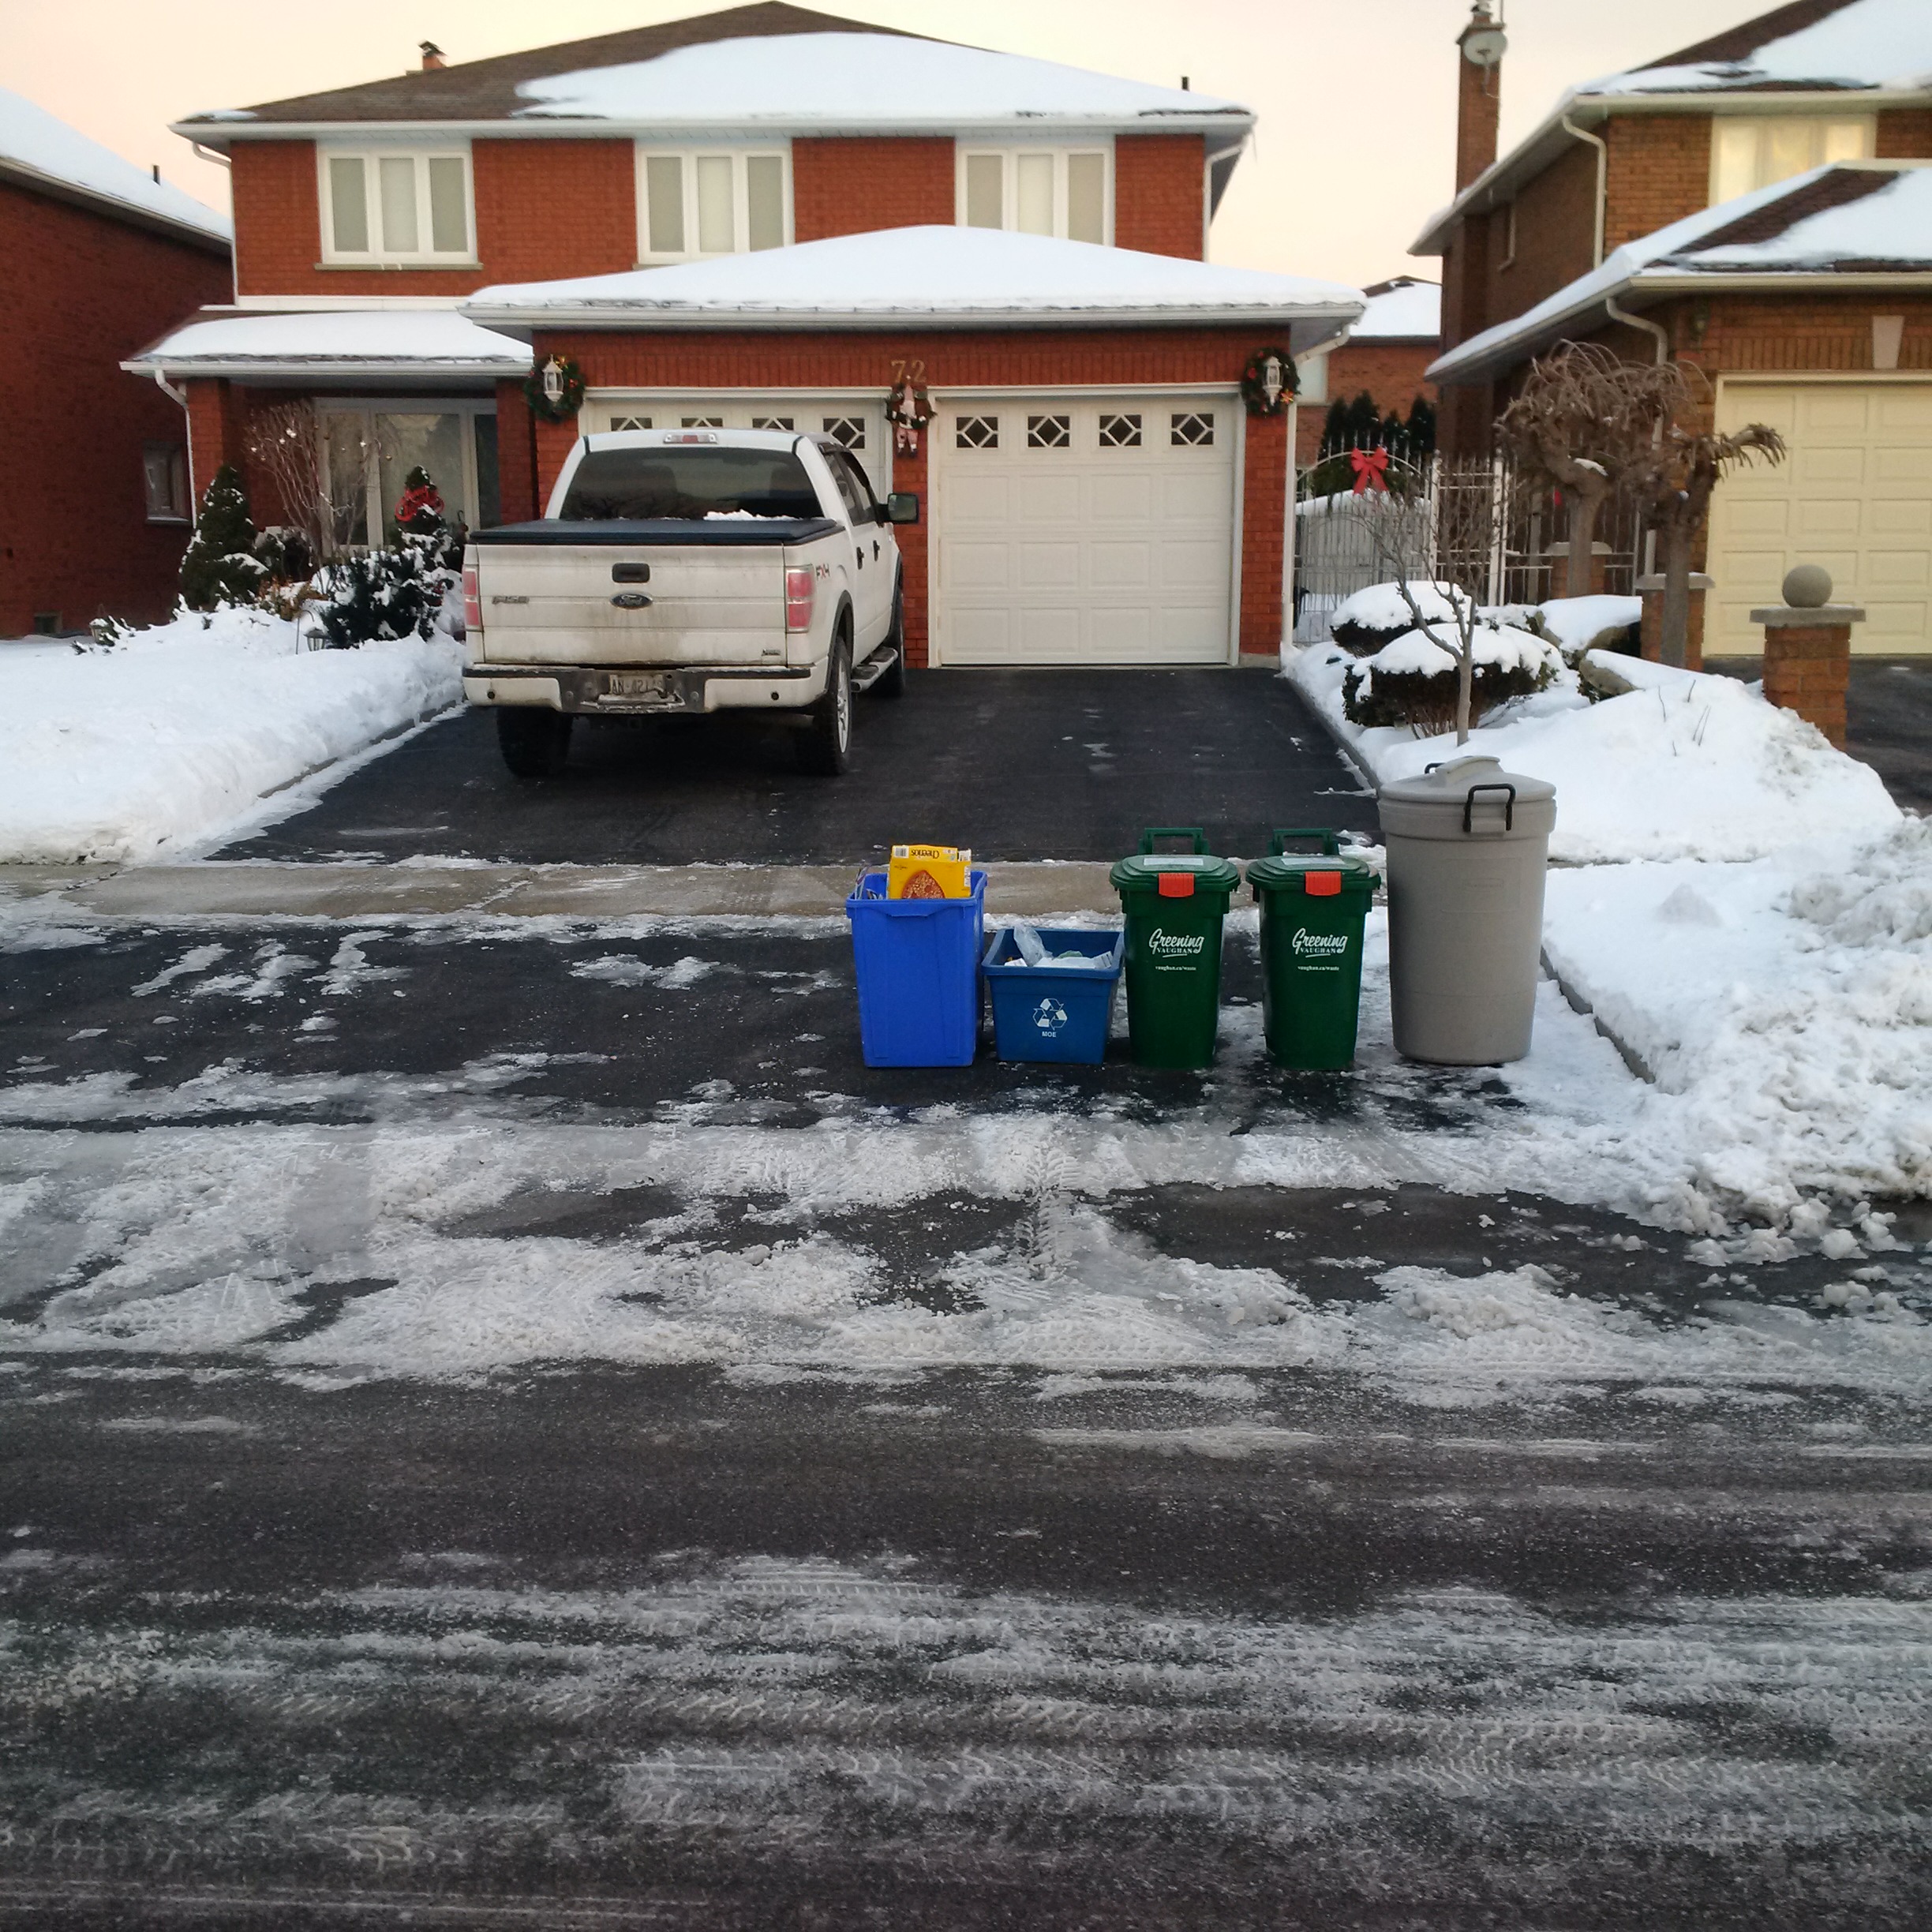 winter placement of bins